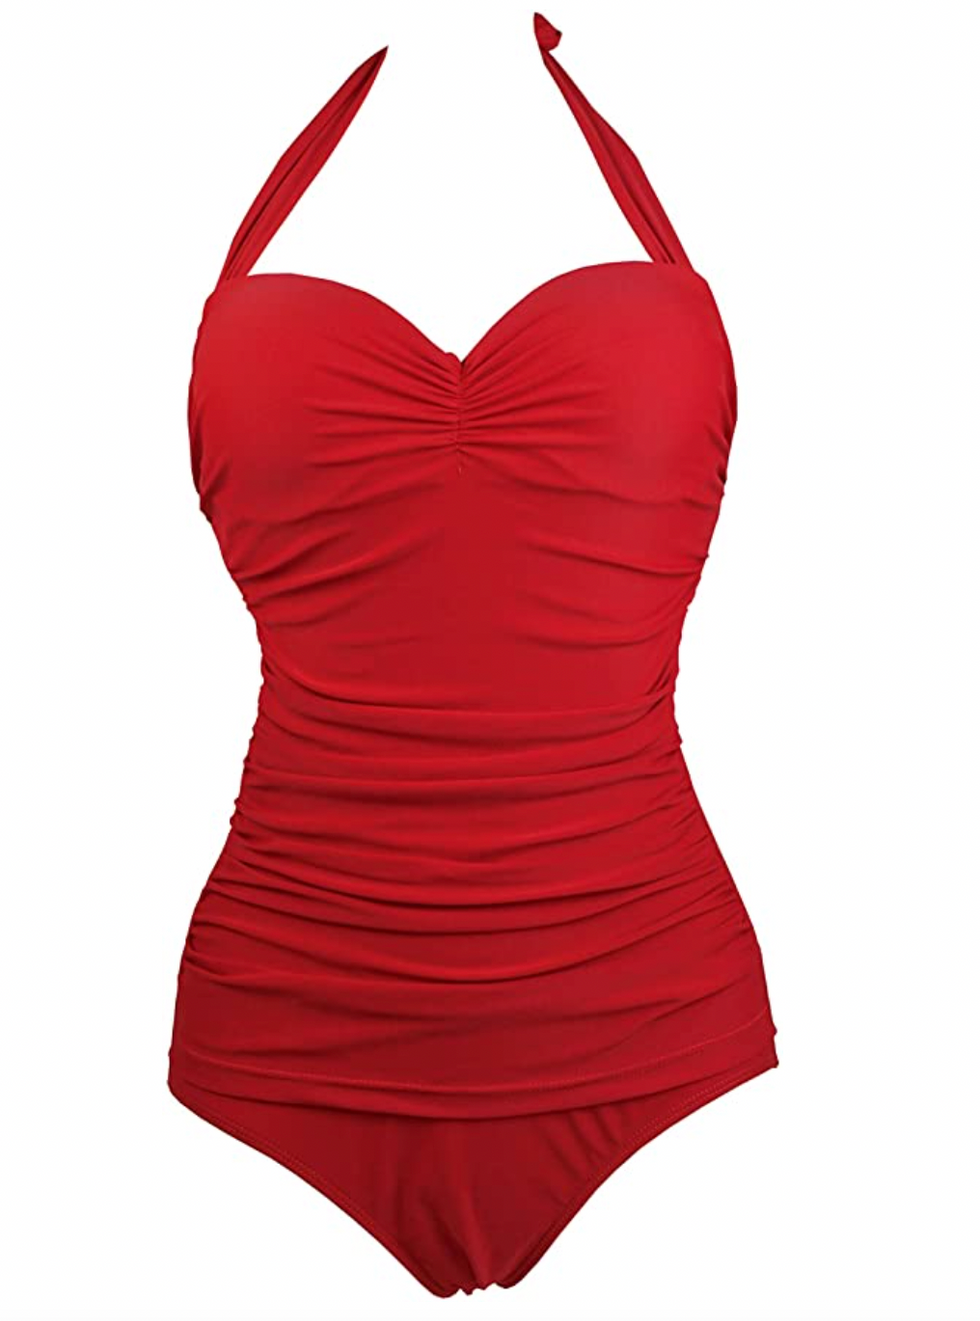 7 best-reviewed swimsuits for moms on Amazon